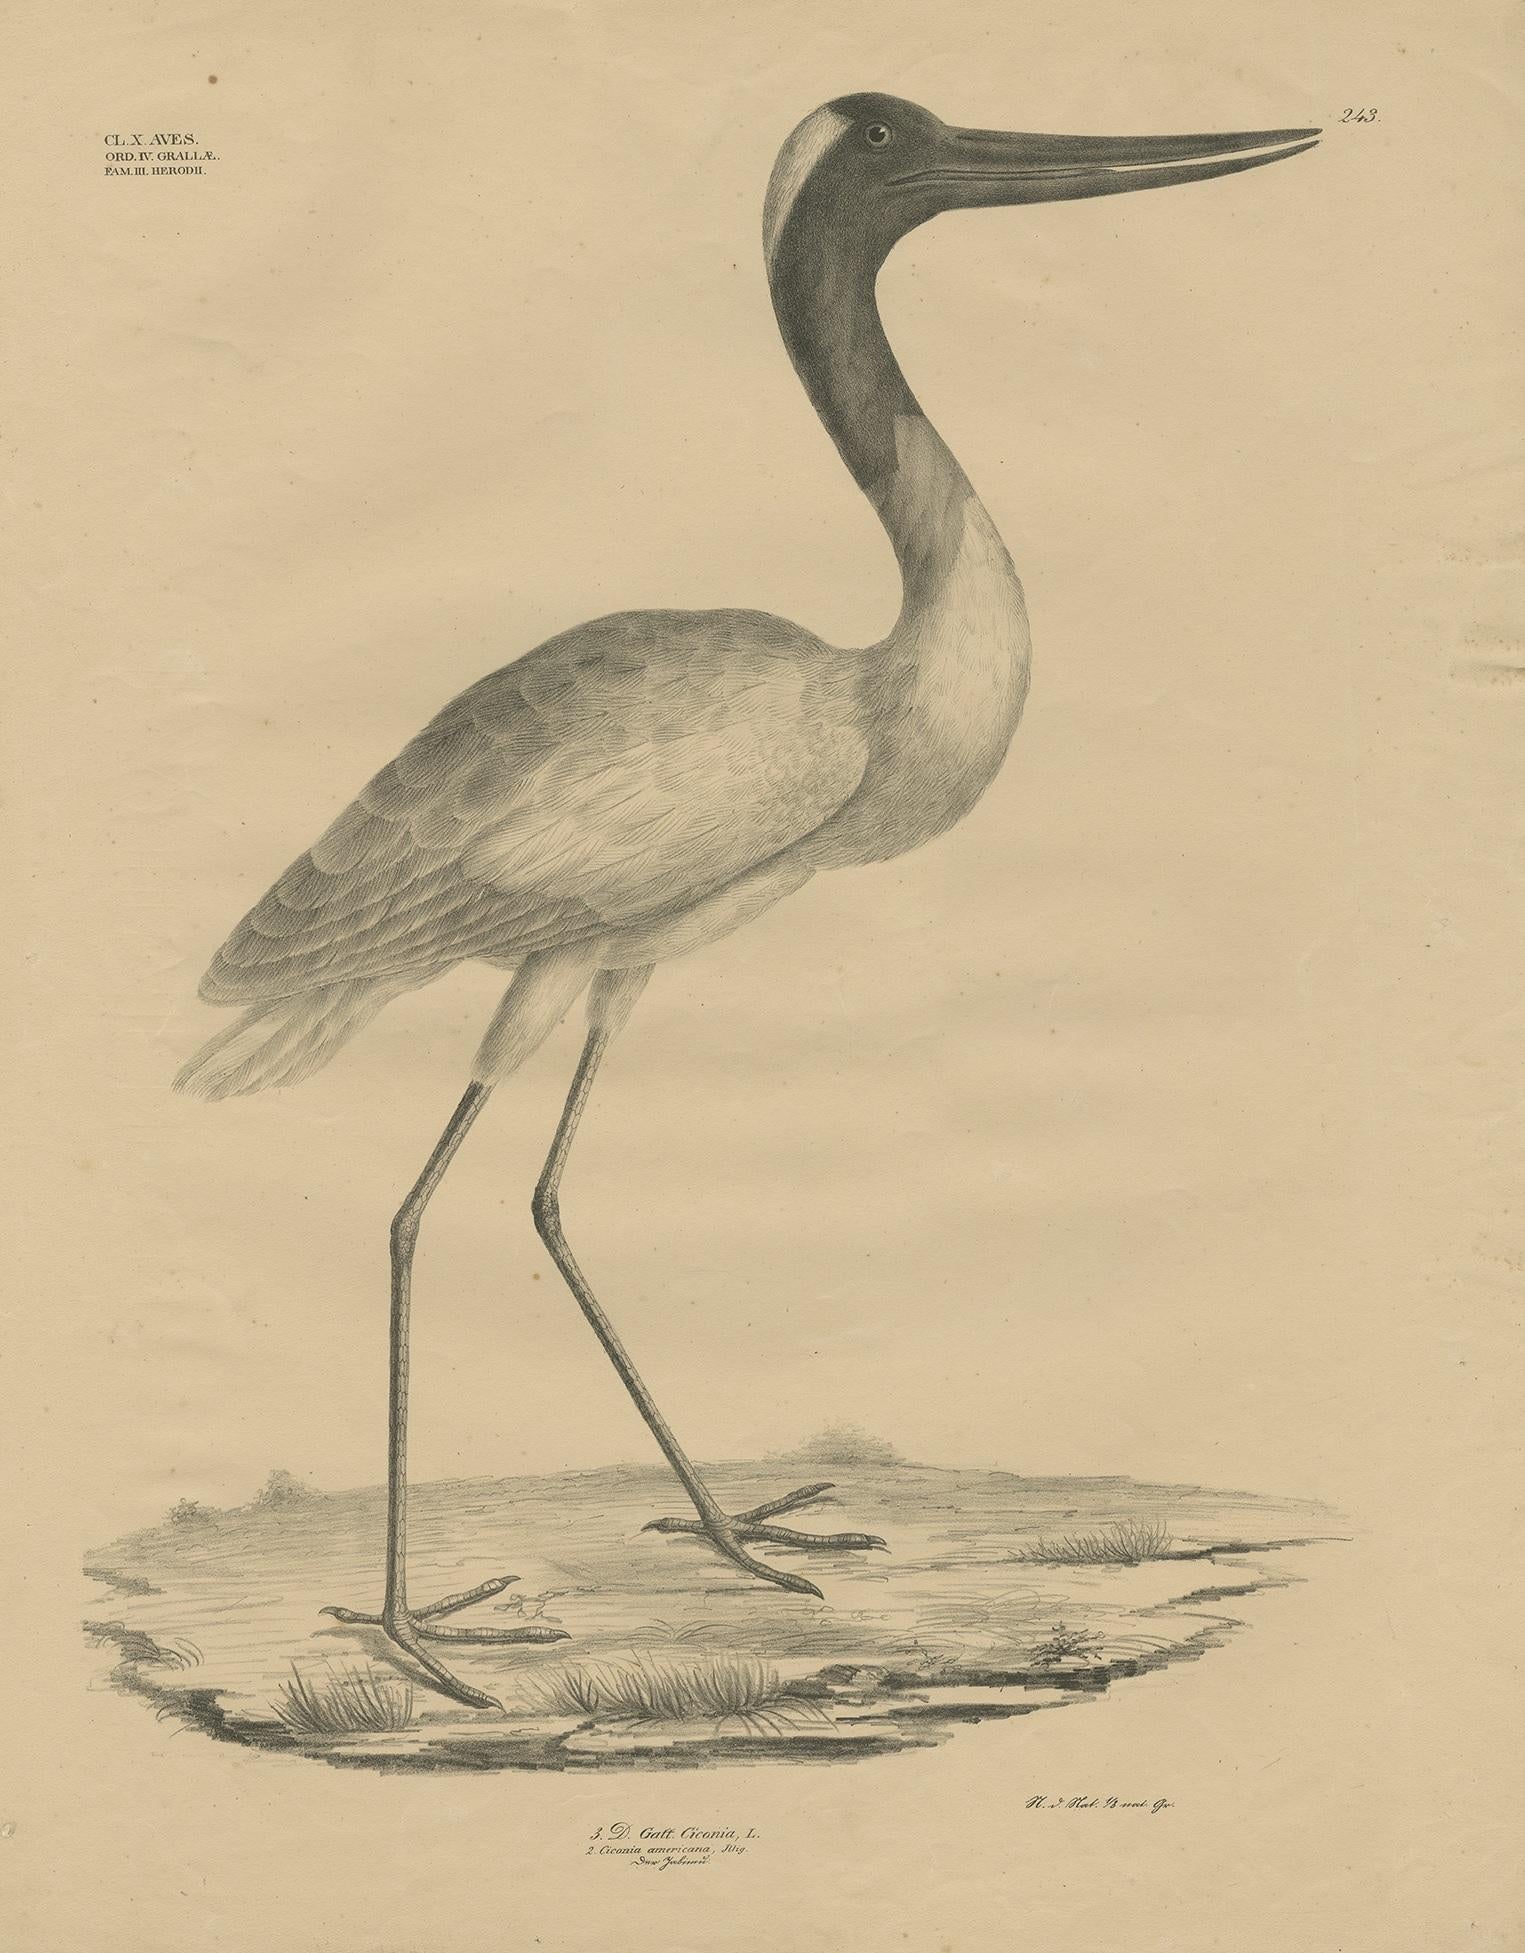 Antique bird print titled 'Gatt Ciconia'. Large lithograph of (most likely) the Maguari stork, a large species of stork that inhabits seasonal wetlands over much of South America, and is very similar in appearance to the white stork; albeit slightly